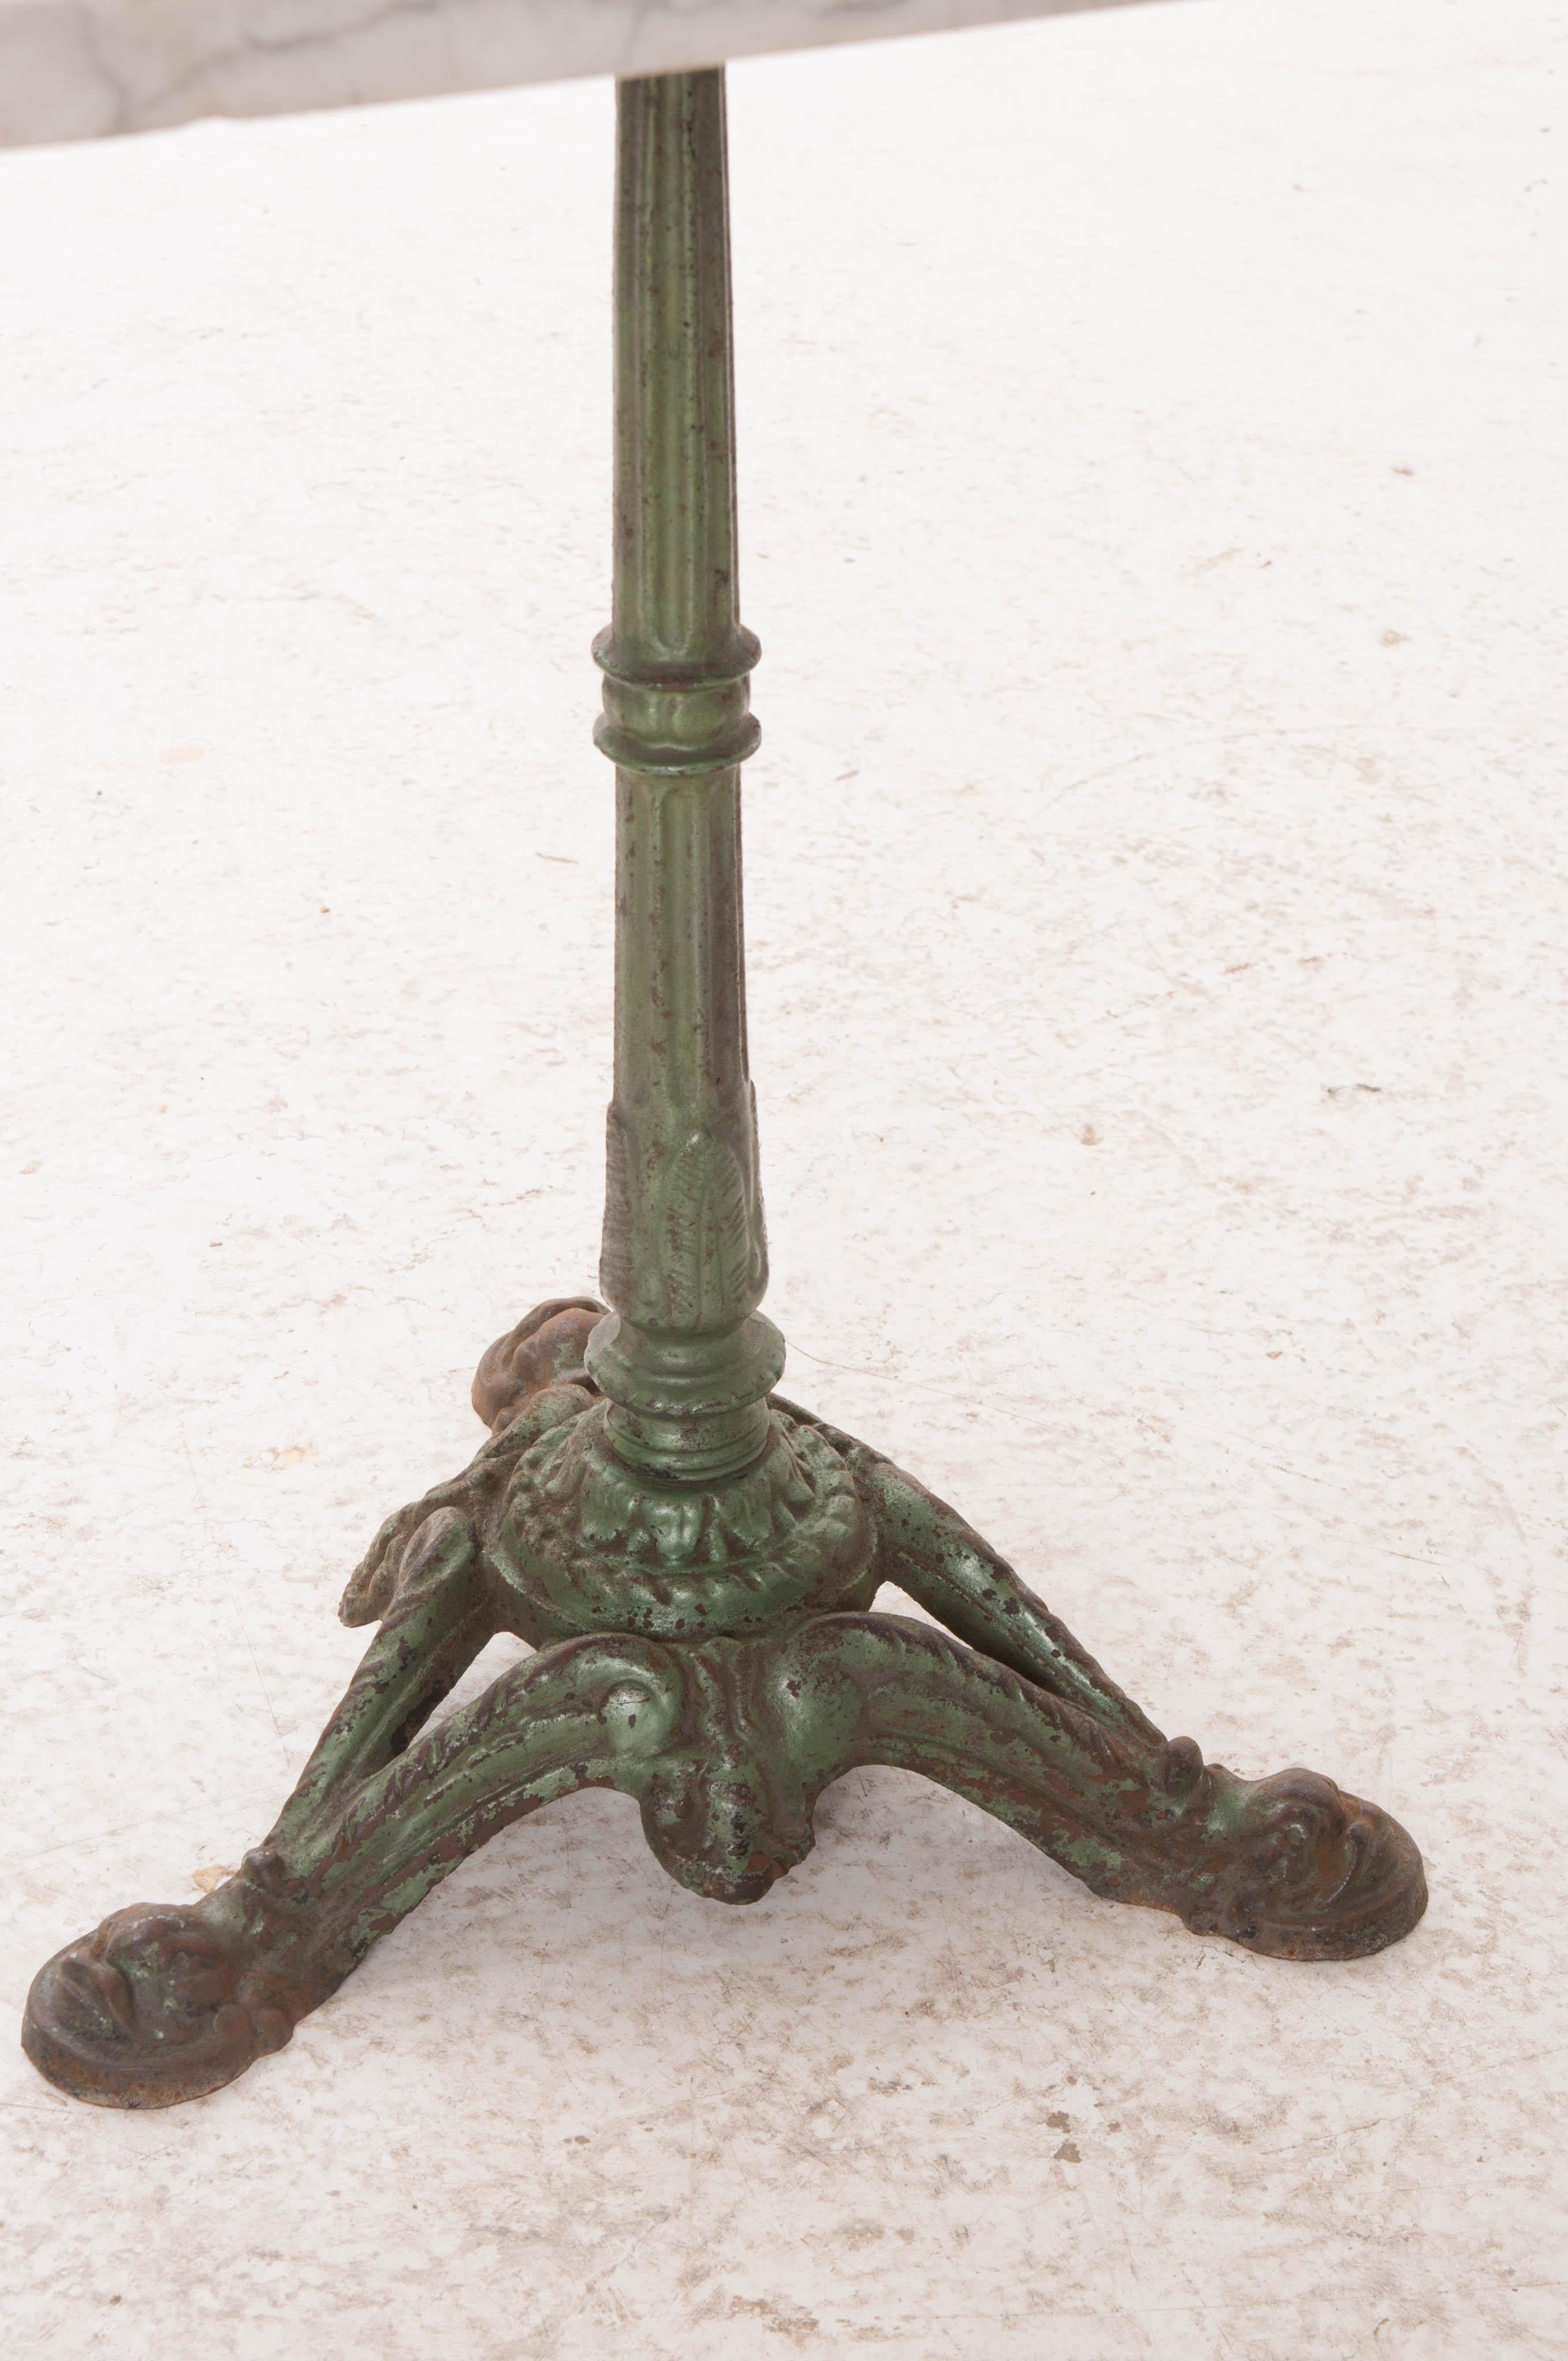 This fabulous cast iron bistro table is outfitted with a beautiful square white marble top and comes from 1920s France. The iron tripod base is painted green with Classic styling and a marvelously aged patina. The white marble top also boasts an